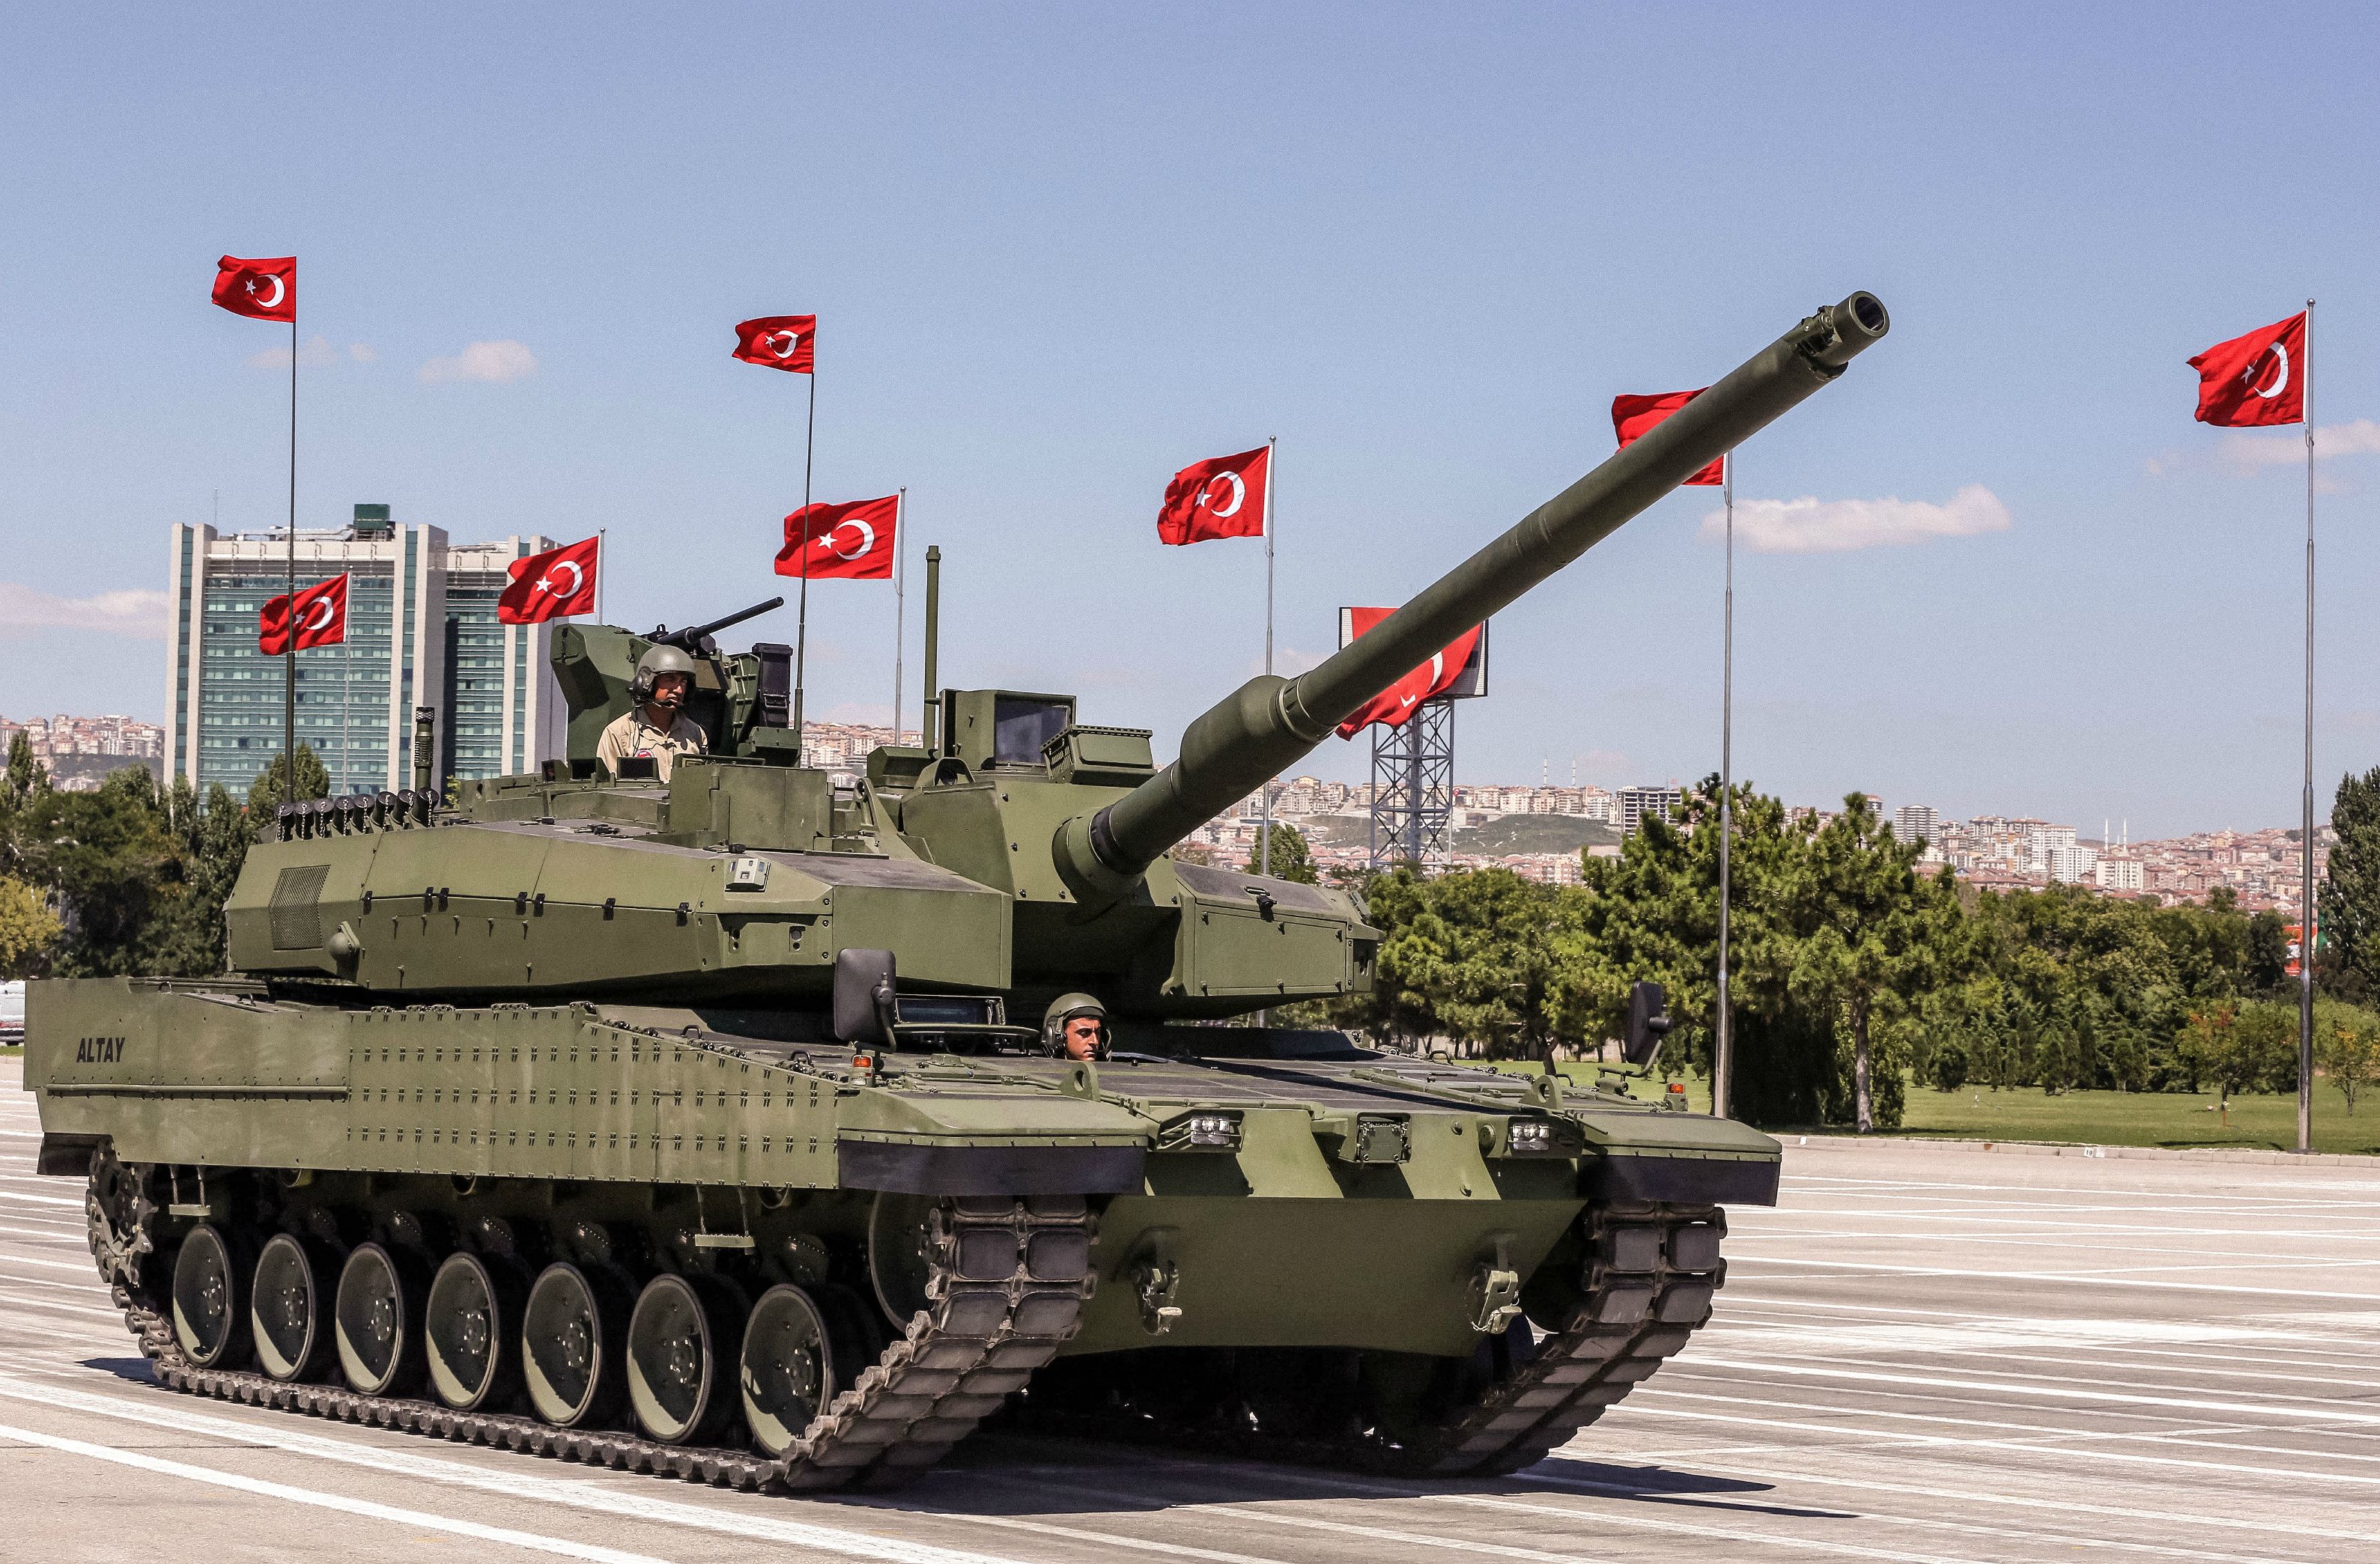 General 3178x2089 tank Turkish Armed Forces military Turkey army vehicle Altay